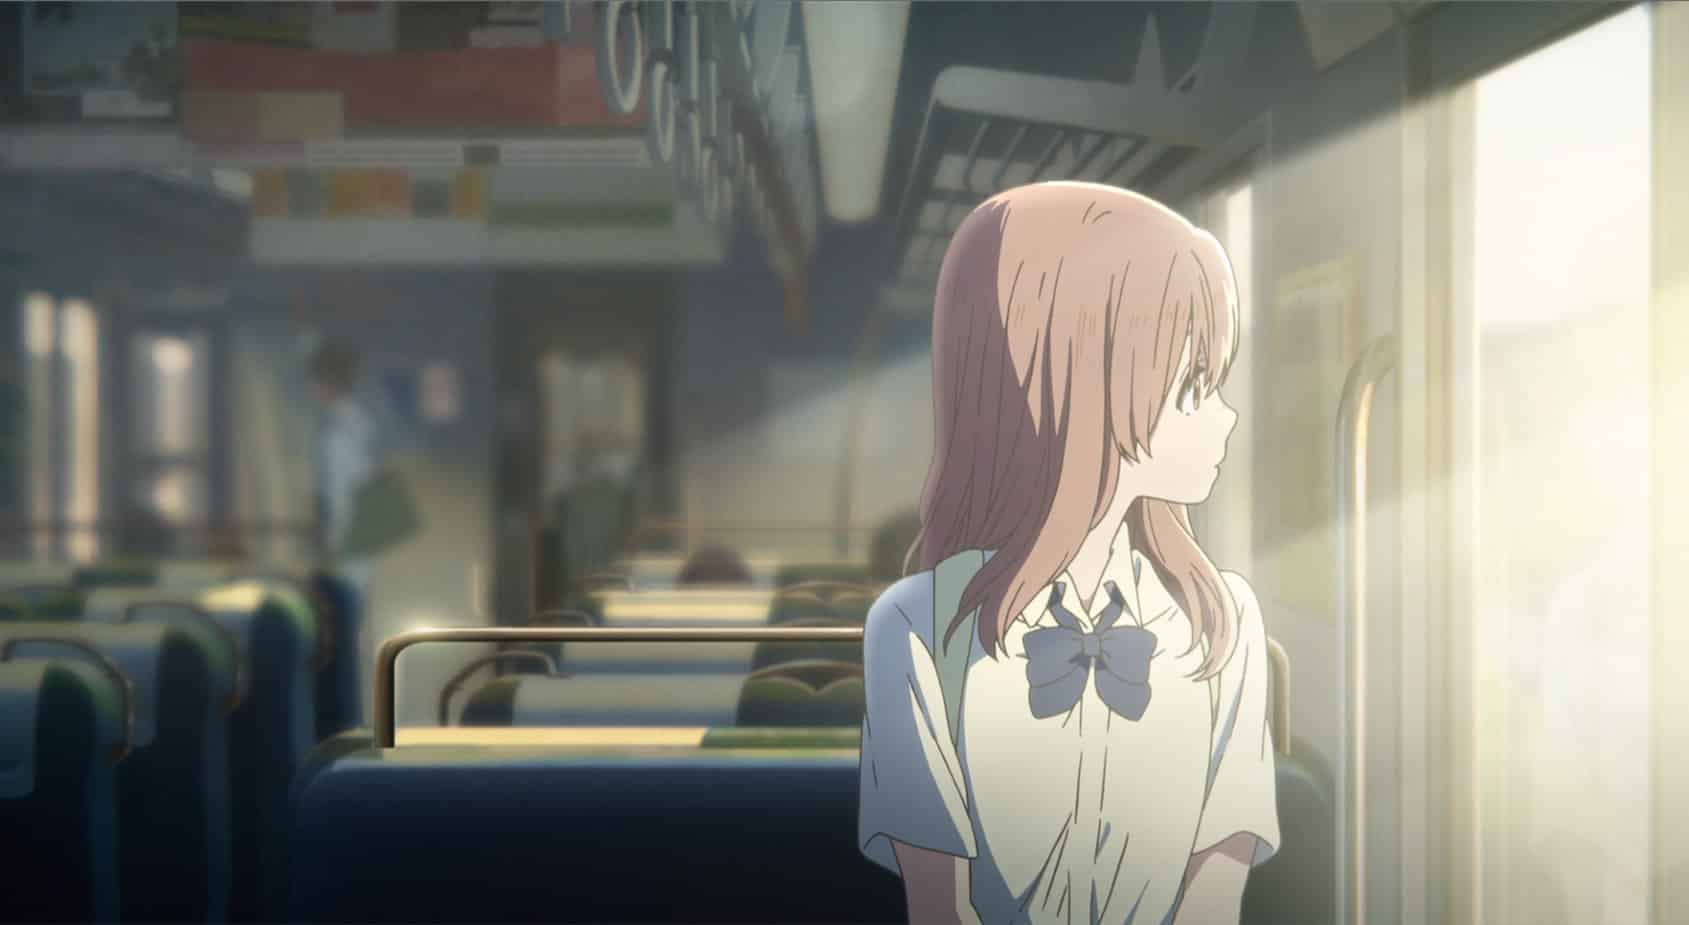 5 Reasons Why A Silent Voice (Koe No Katachi) is a Severely Underrated Anime - Shoko Train